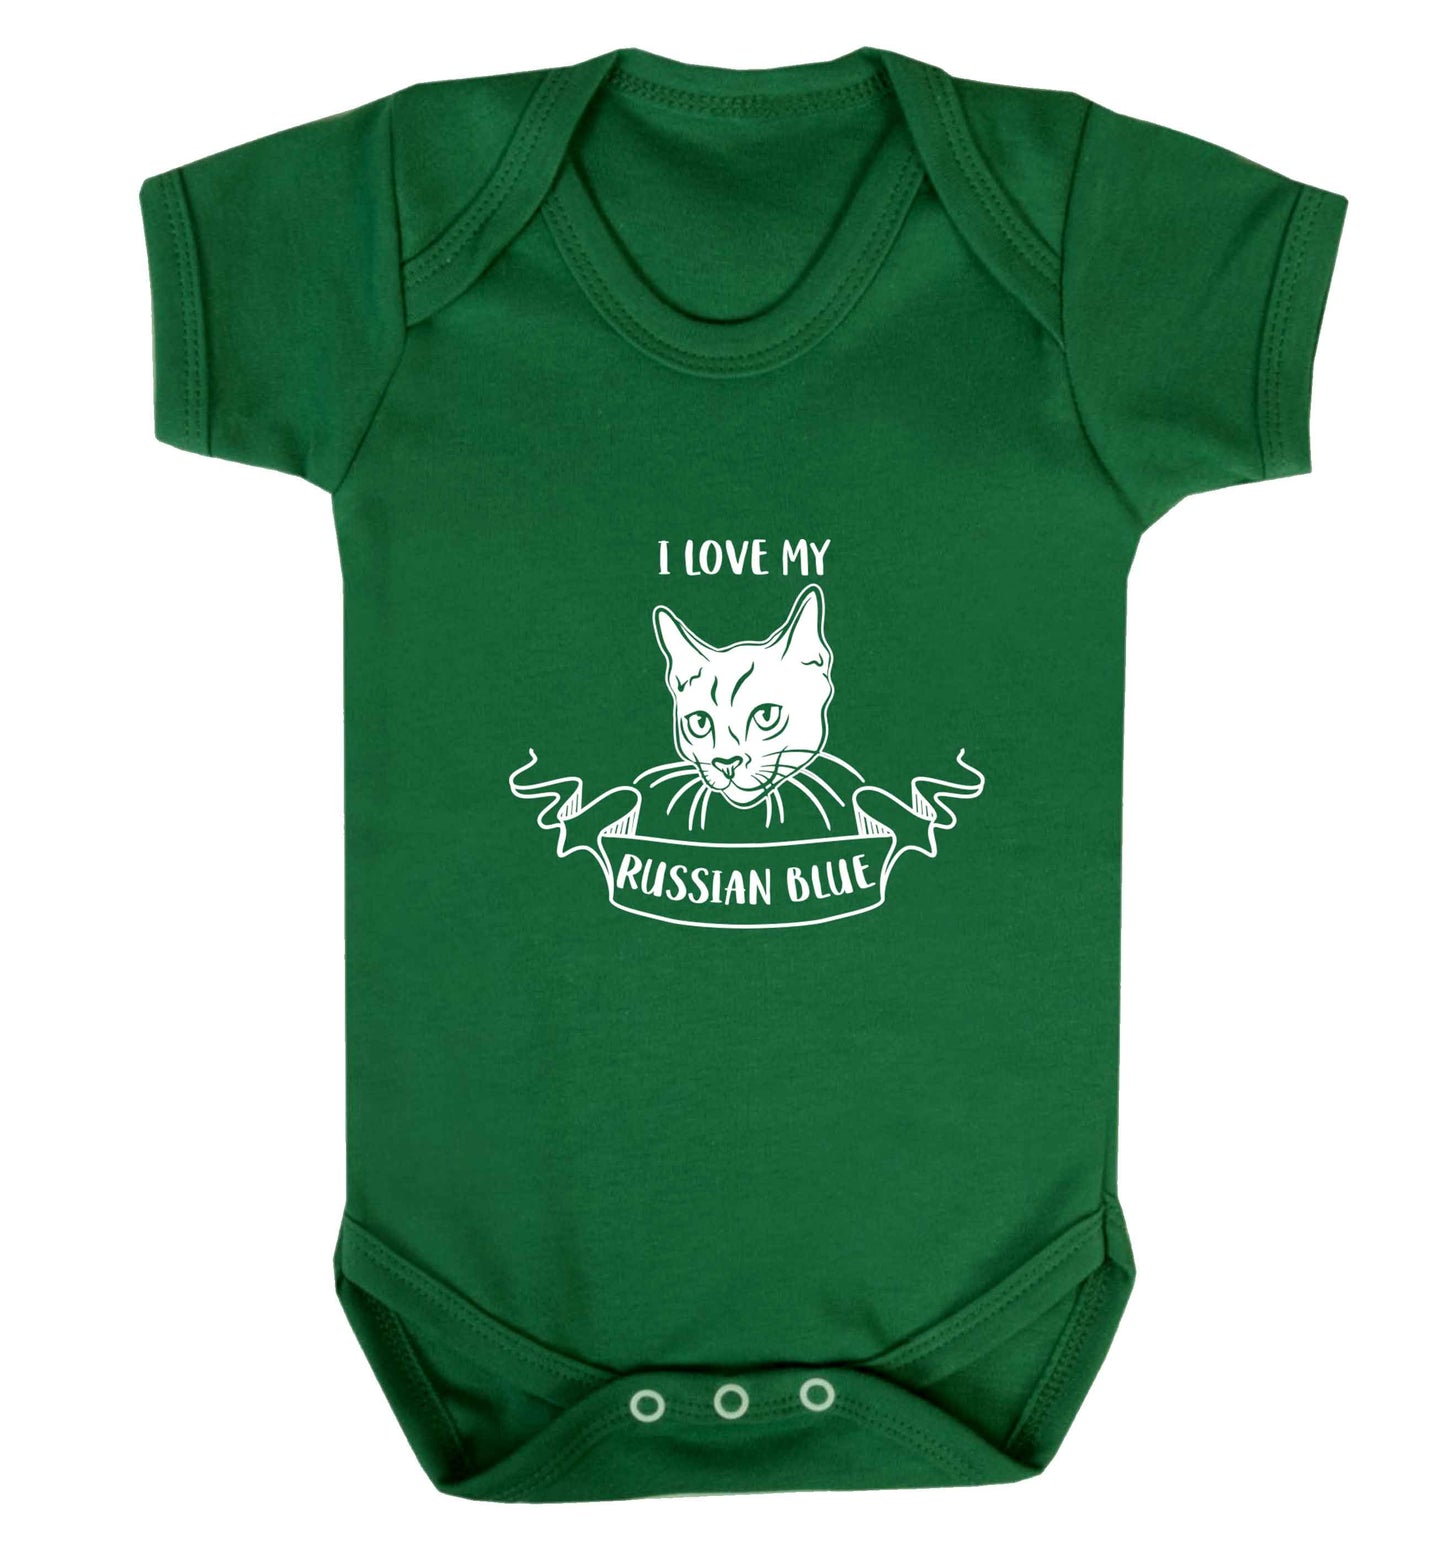 I love my russian blue baby vest green 18-24 months